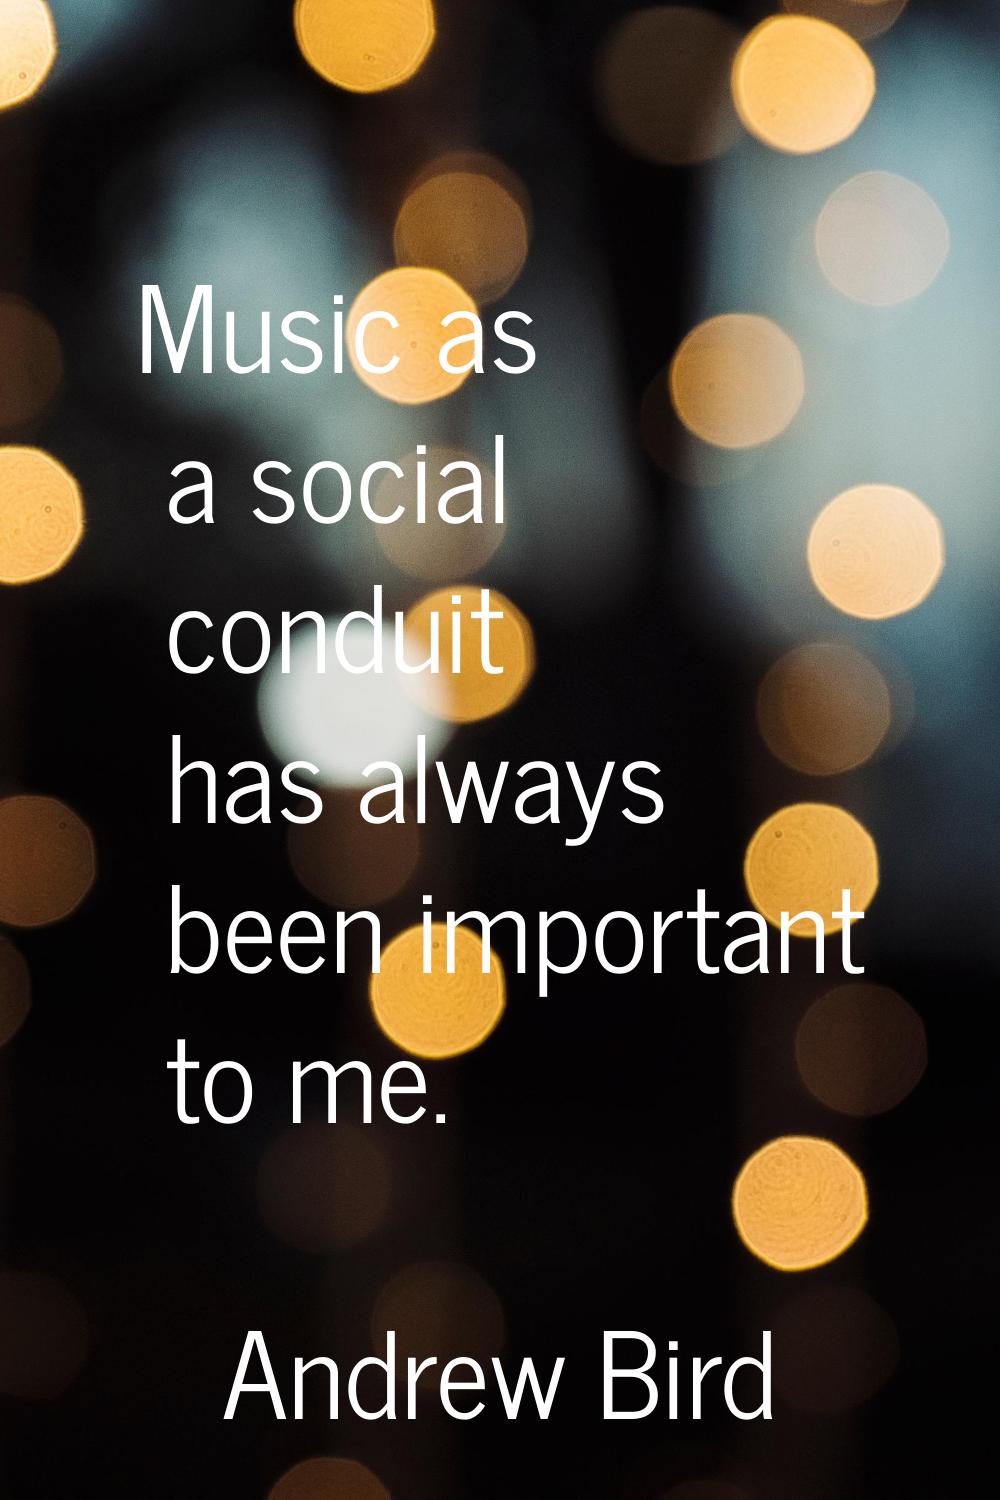 Music as a social conduit has always been important to me.